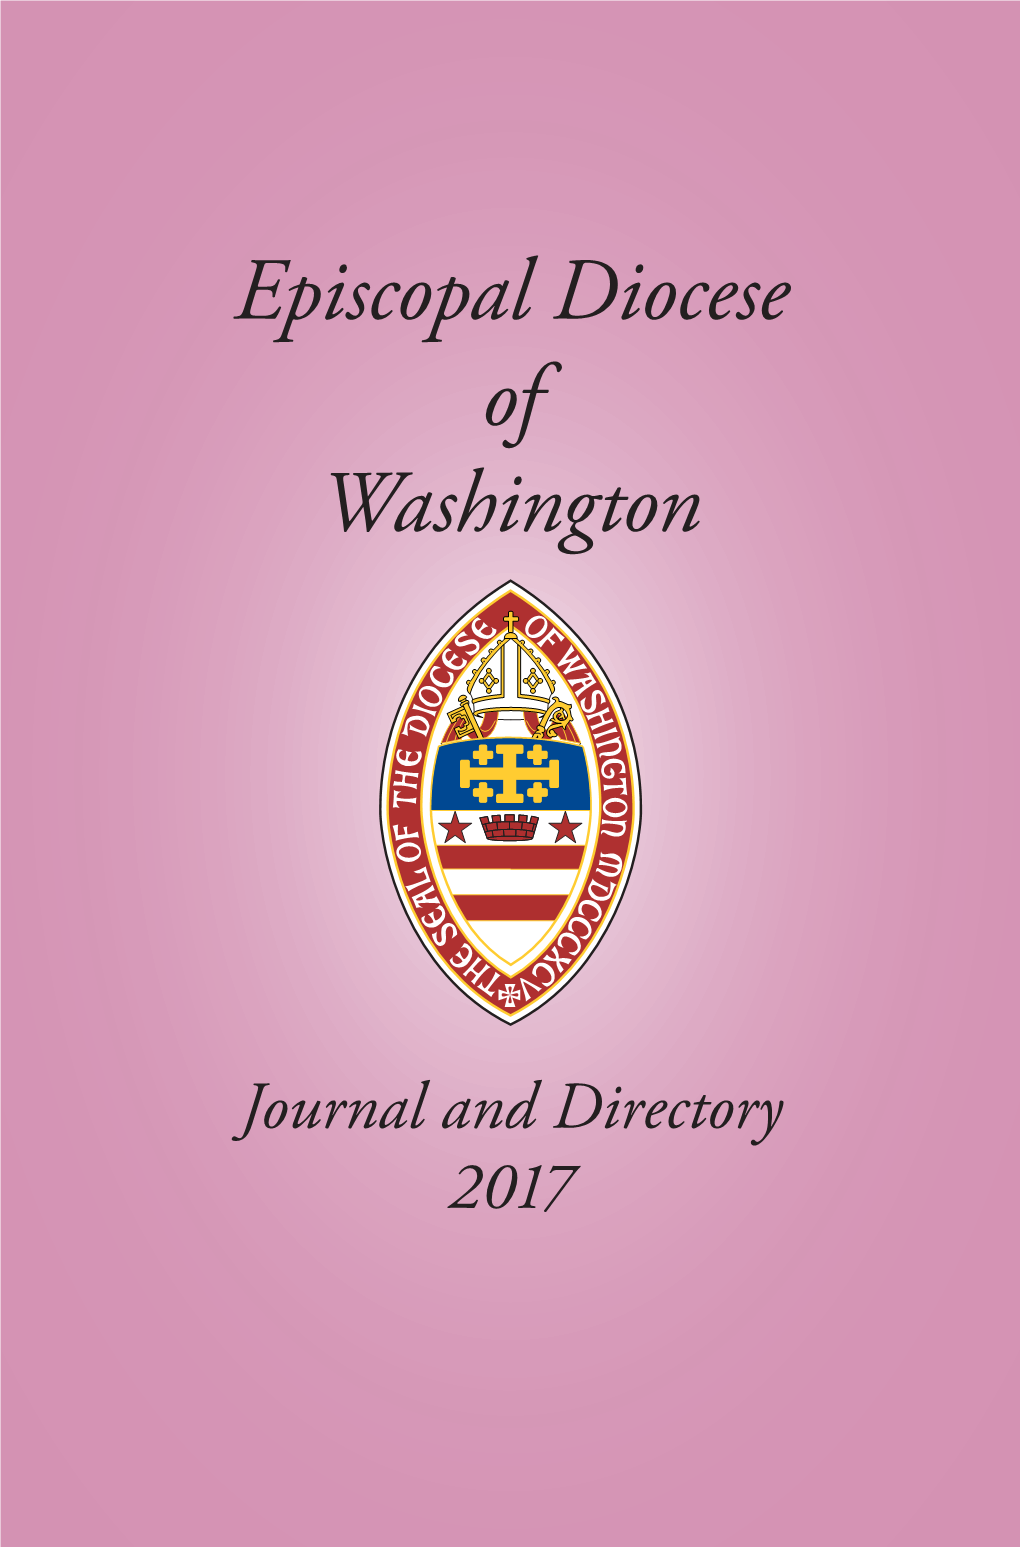 2017 Directory of the Diocese of Washington and Journal of the One Hundred Twenty–Second Annual Meeting of the Convention of the Diocese of Washington